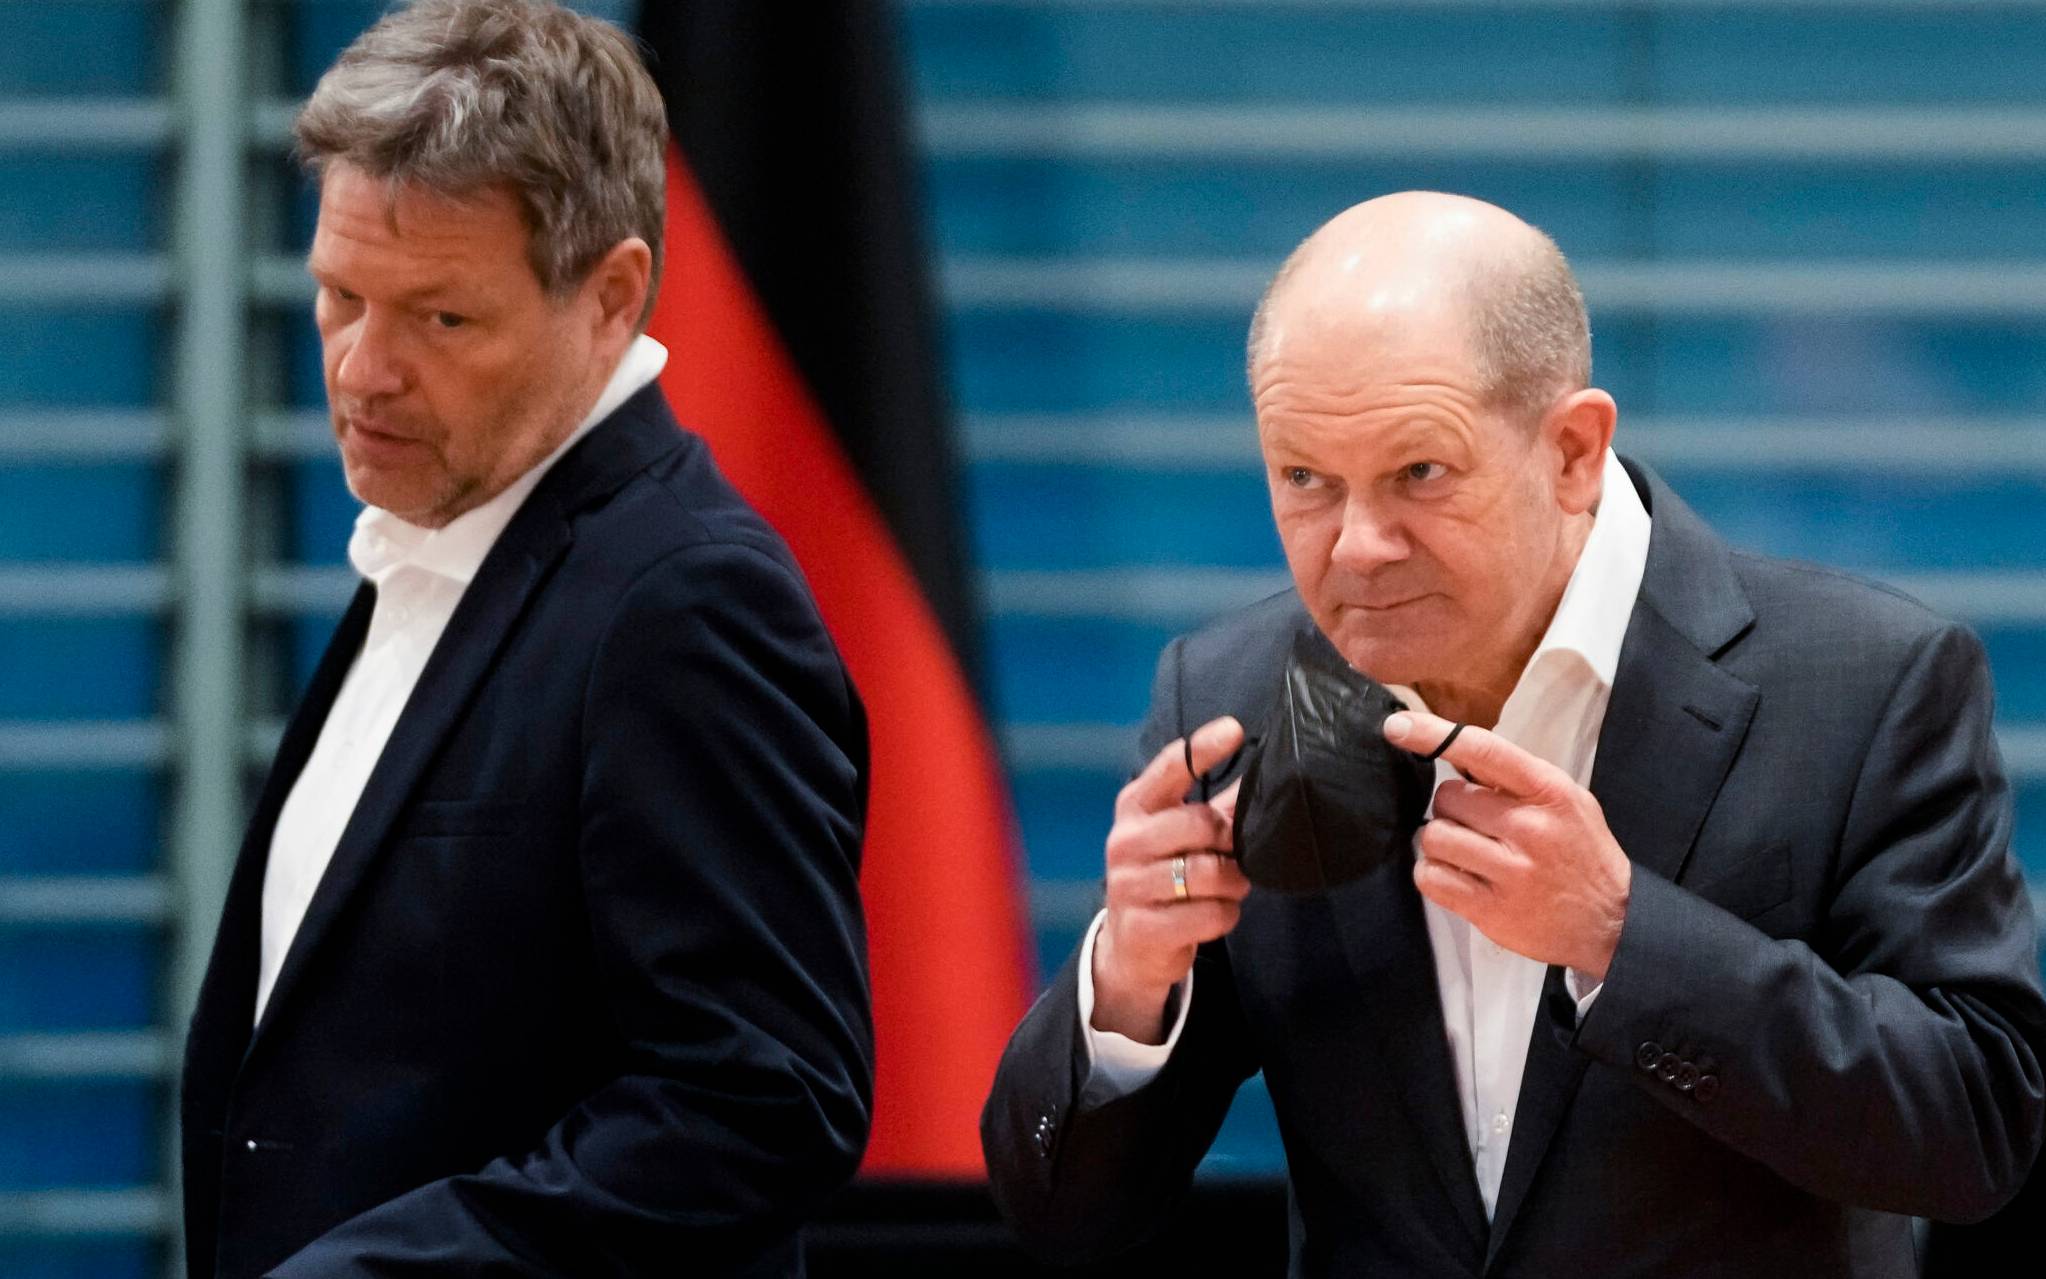 German Chancellor Olaf Scholz (R) and German Minister of Economics and Climate Protection Robert Habeck speak as they arrive for a meeting of Germany's Security Cabinet at the Chancellery in Berlin on April 5, 2022. (Photo by Markus Schreiber / POOL / AFP)